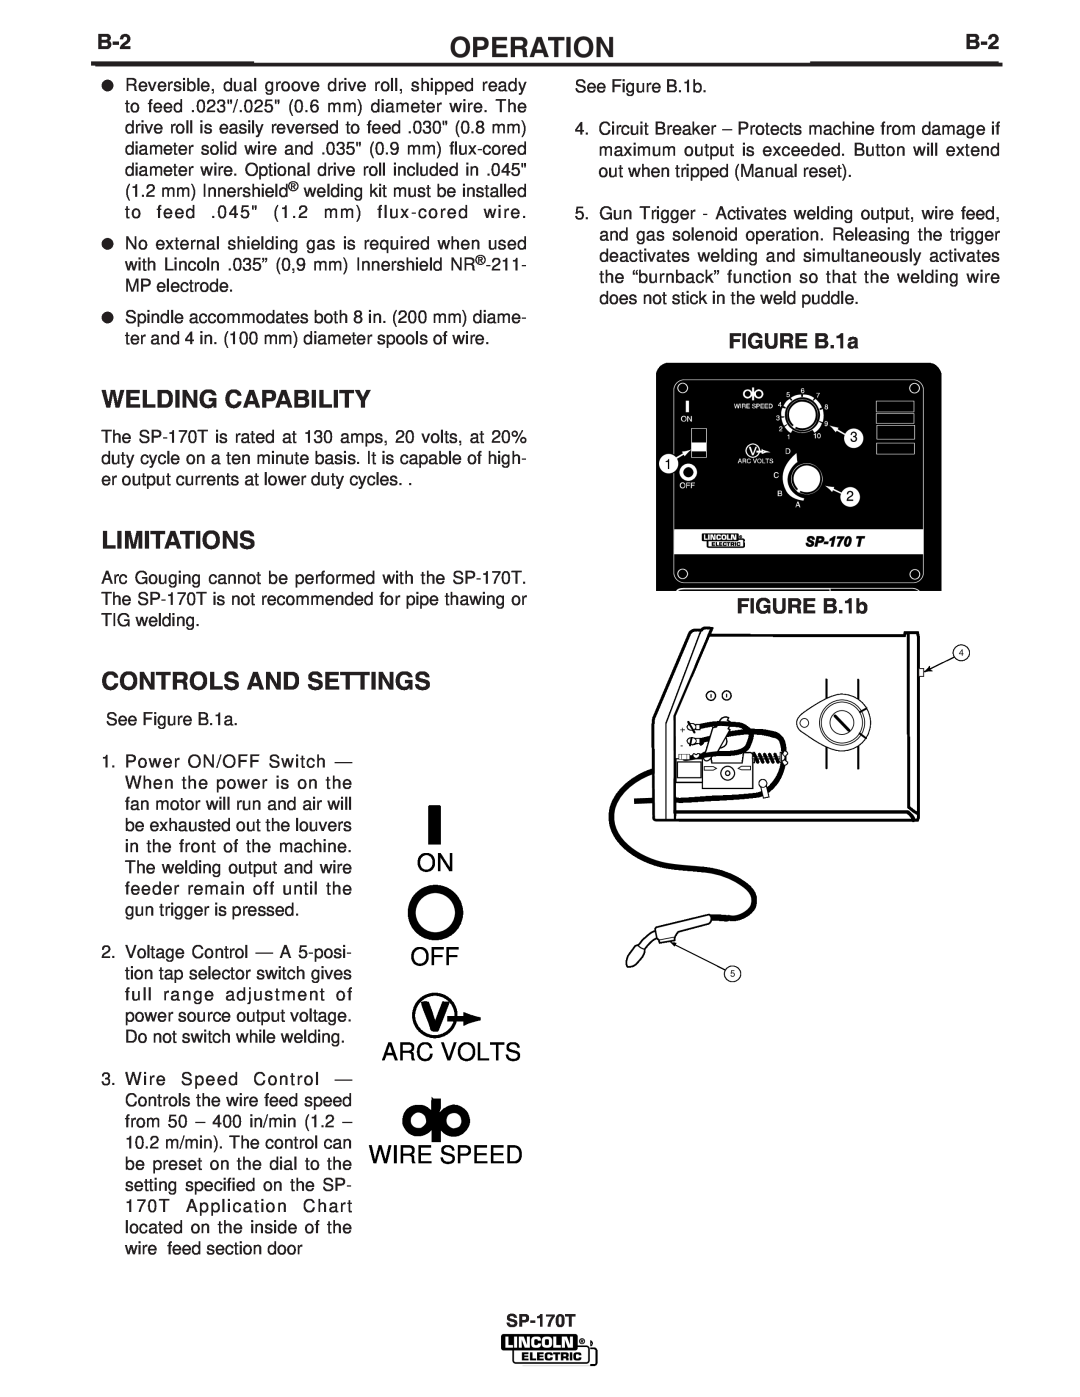 Lincoln Electric IM794 manual Welding Capability, Limitations, Controls And Settings, Operation, Off Arc Volts Wire Speed 